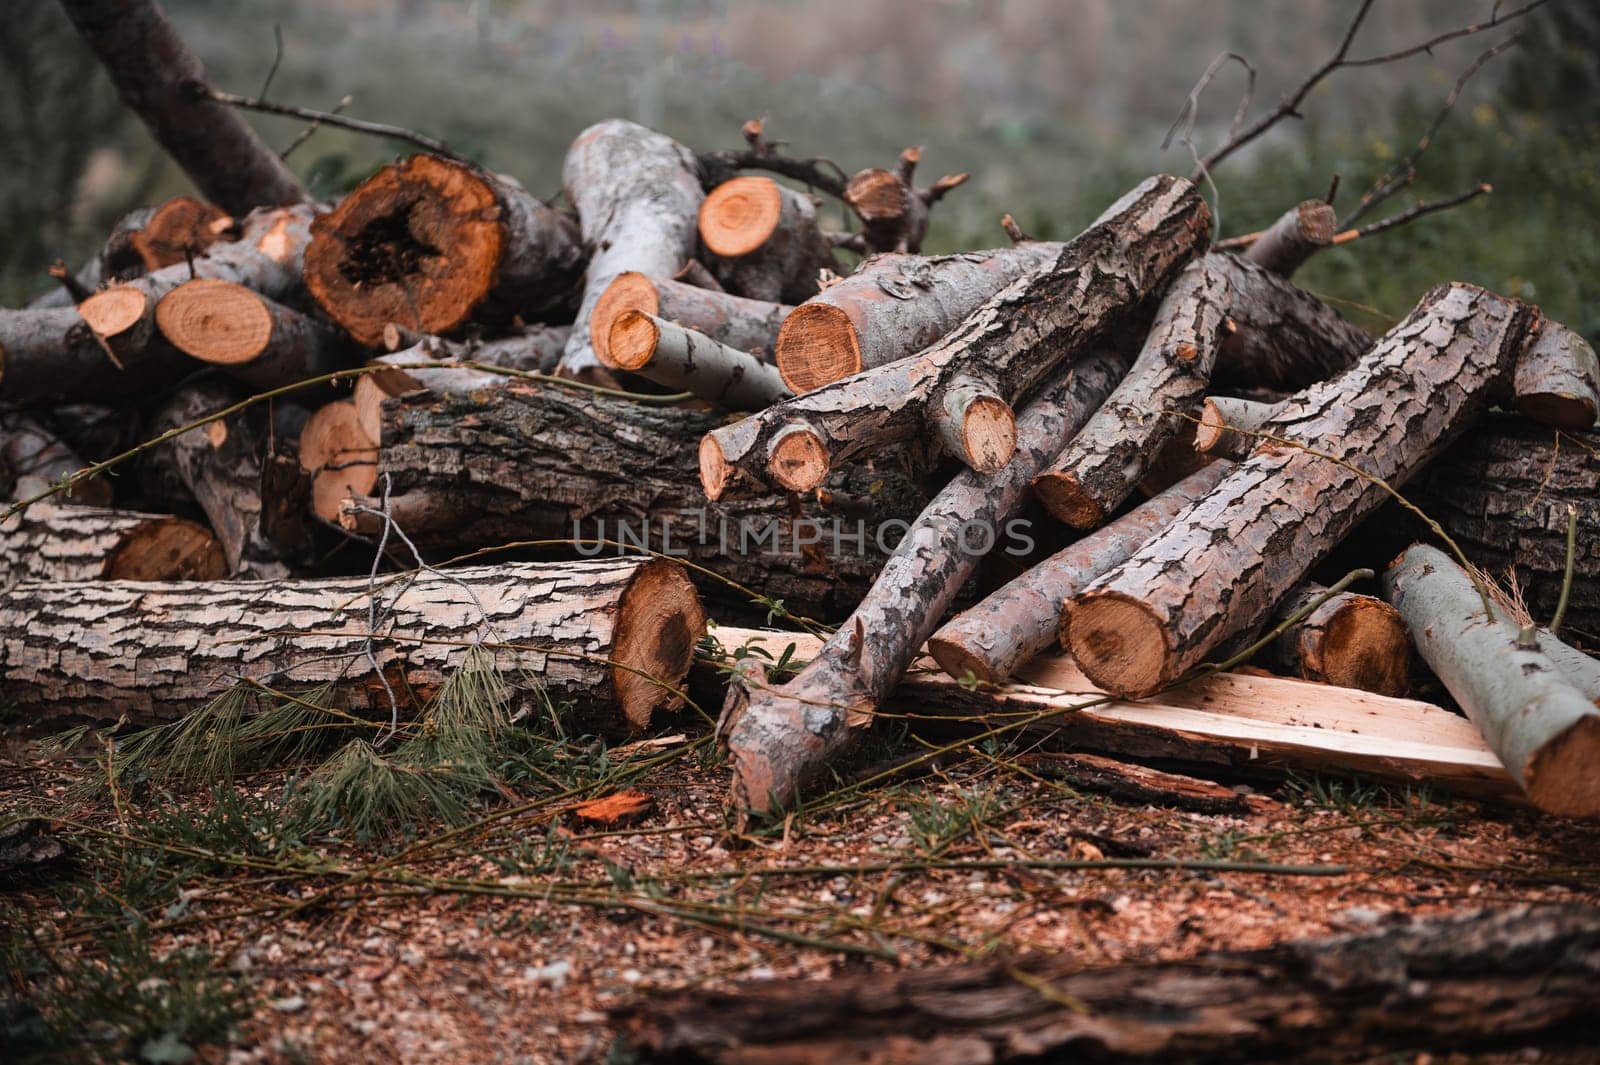 Cut trees of construction wood after deforestation stacked as woodpile. Lumber, timber industry, sustainable resources on wood log and tree carcass. Still life. A pile of logs and firewood in forest